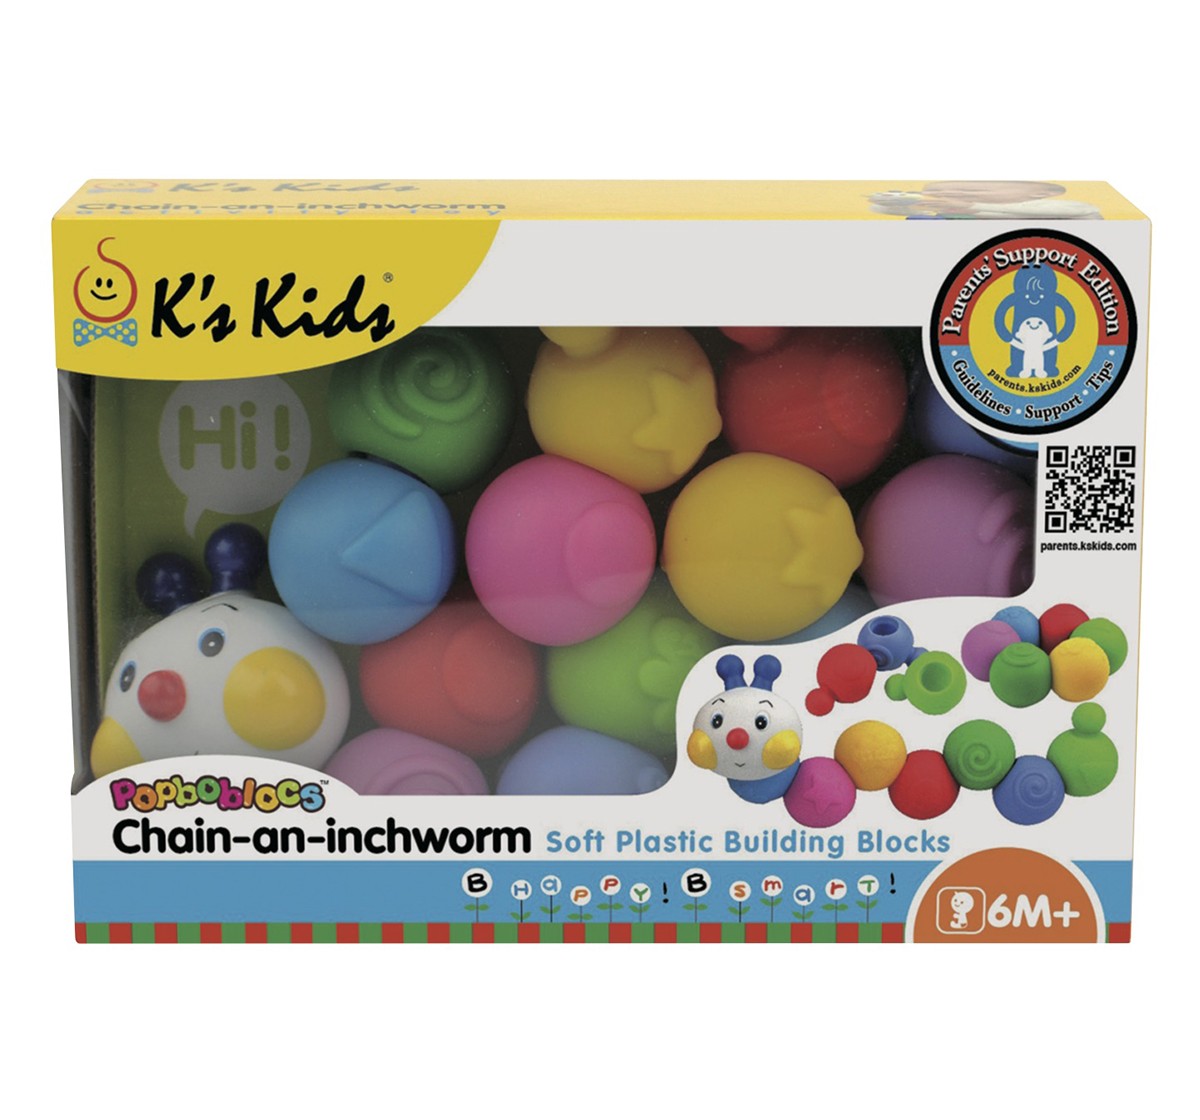 K'S Kids Popbo Blocks - Chain-An-Inchworm, Multi Color Early Learner Toys for Kids age 1Y+ 